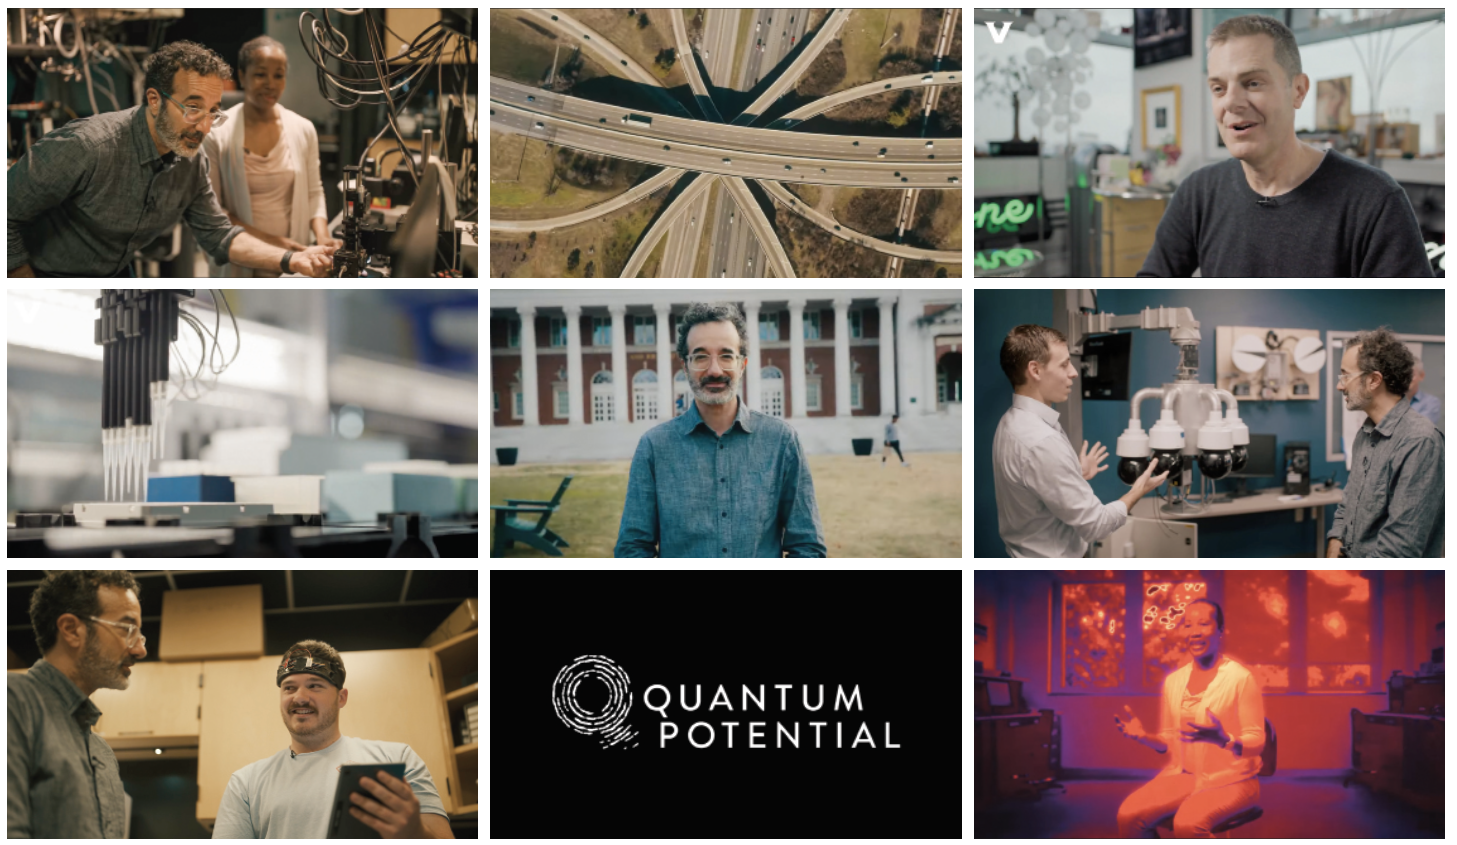 Images from the Quantum Potential videos